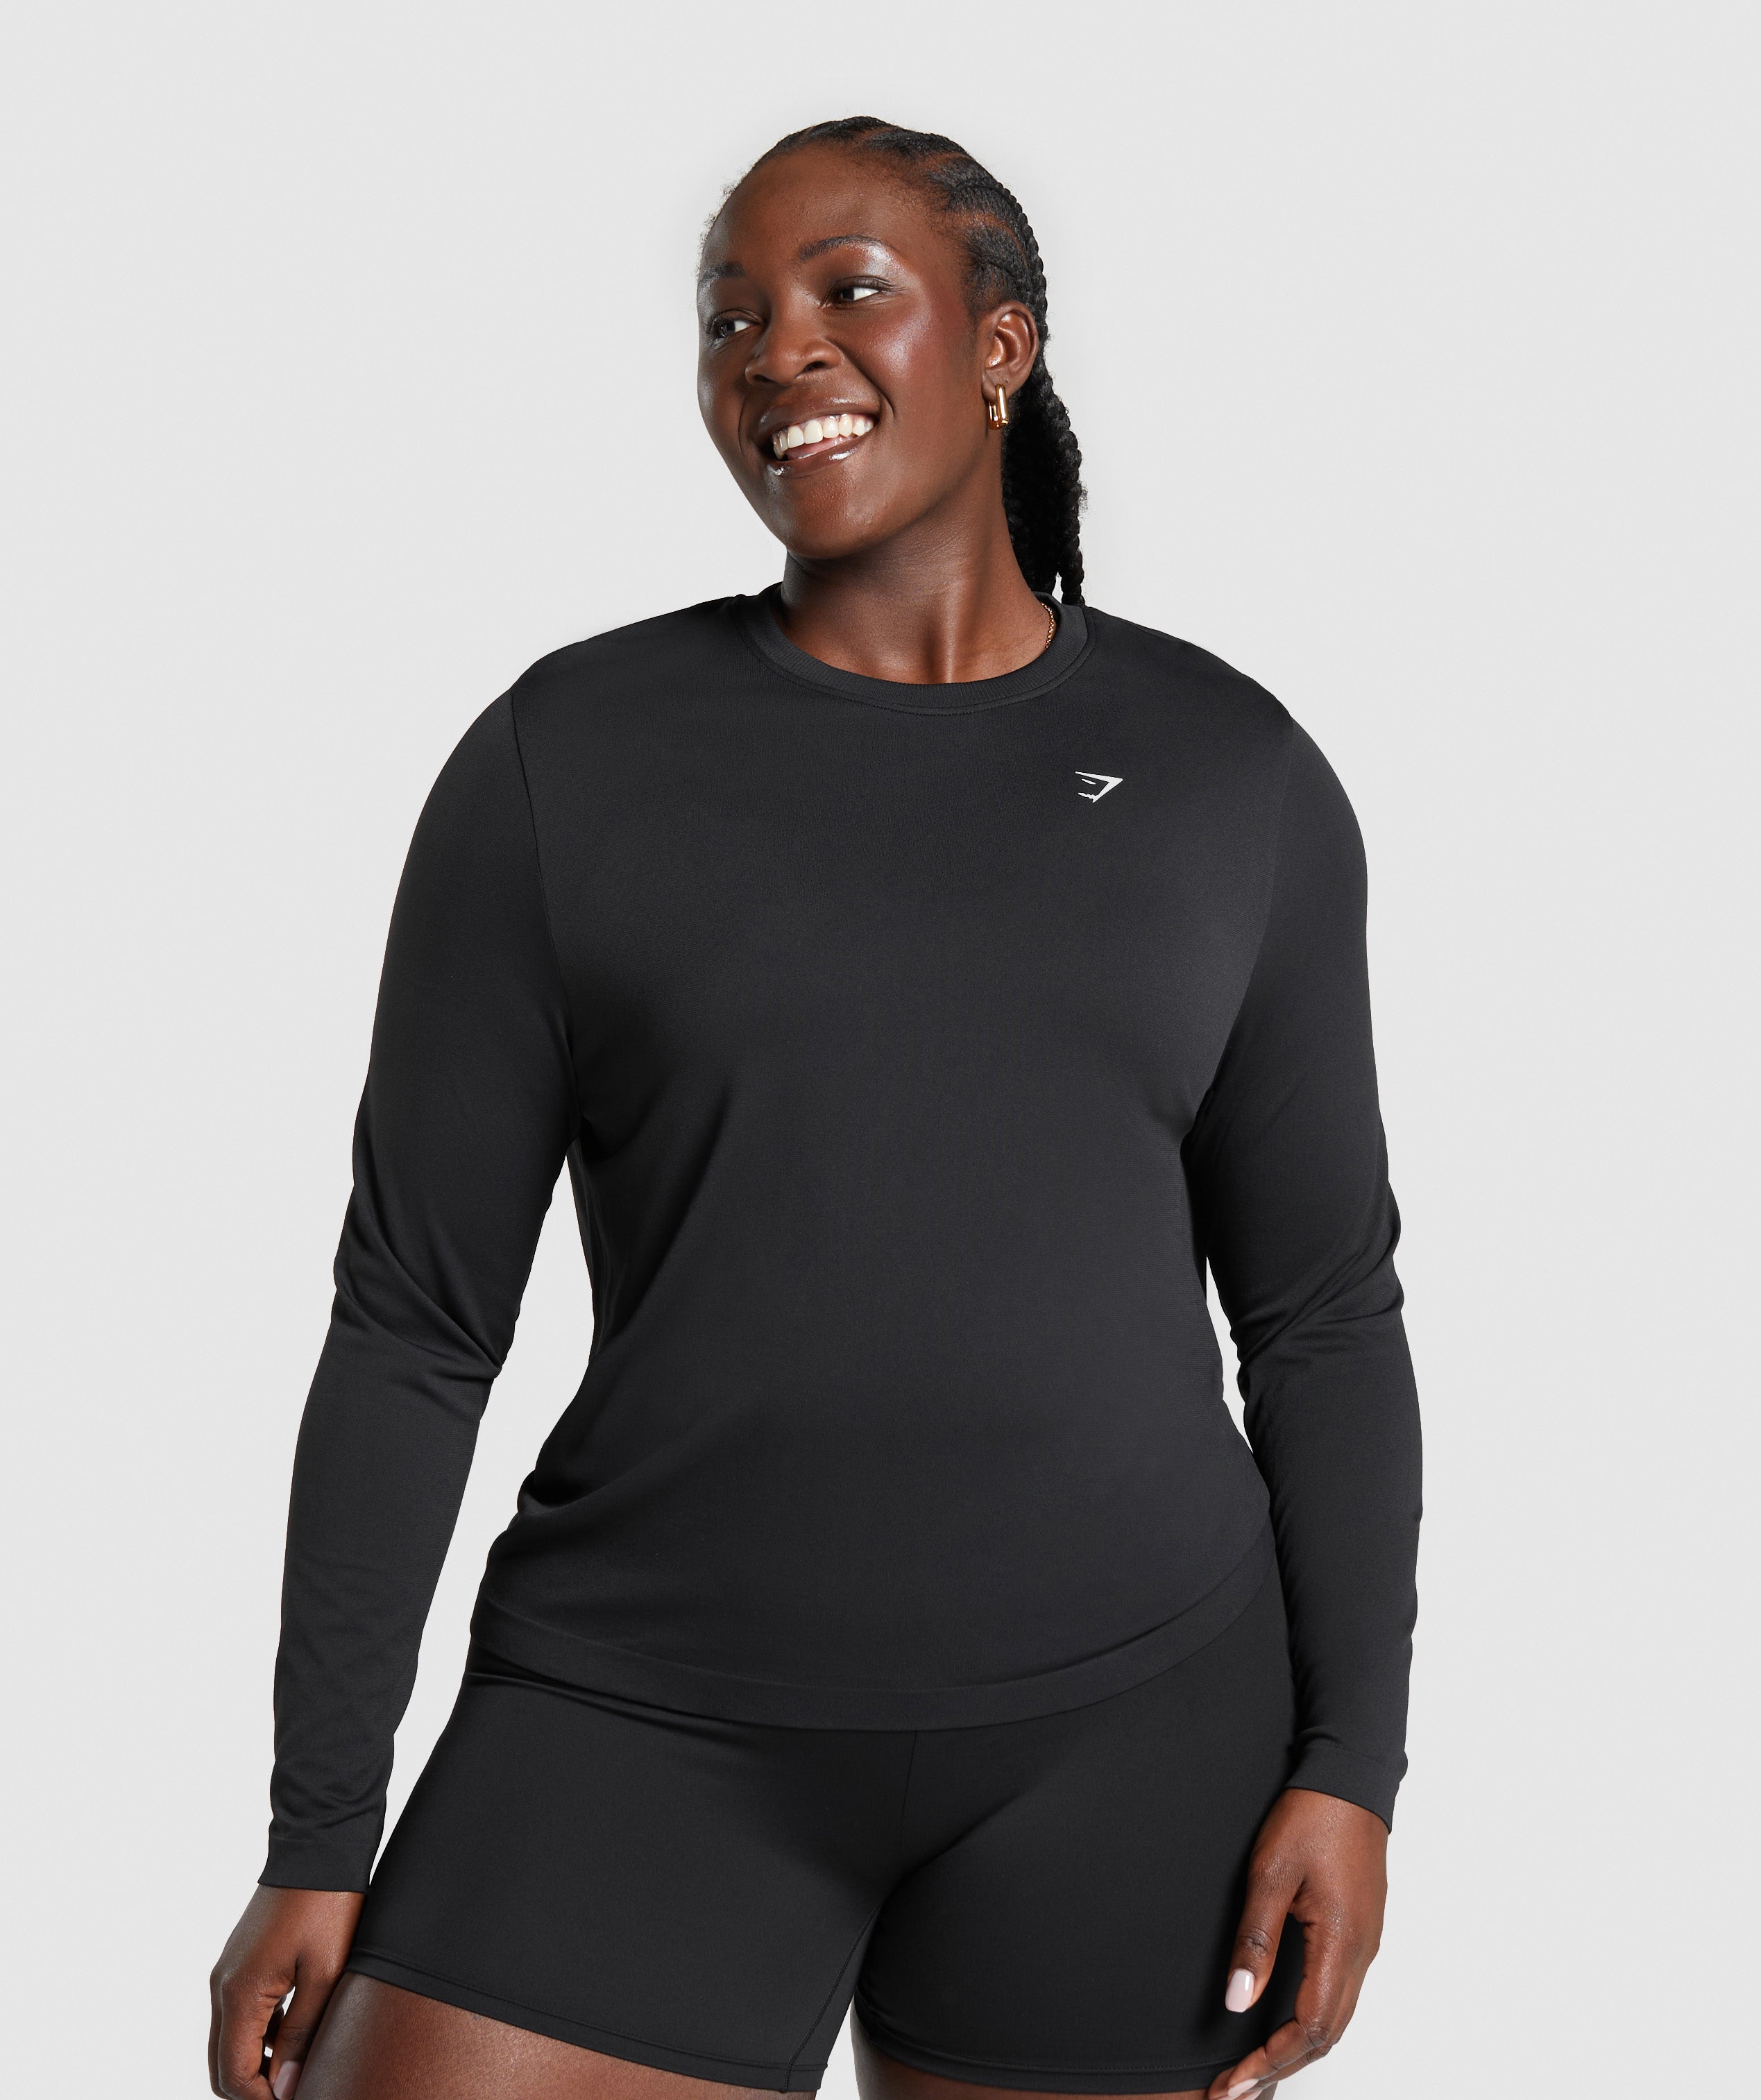 Everyday Seamless Long Sleeve Top in Black - view 3